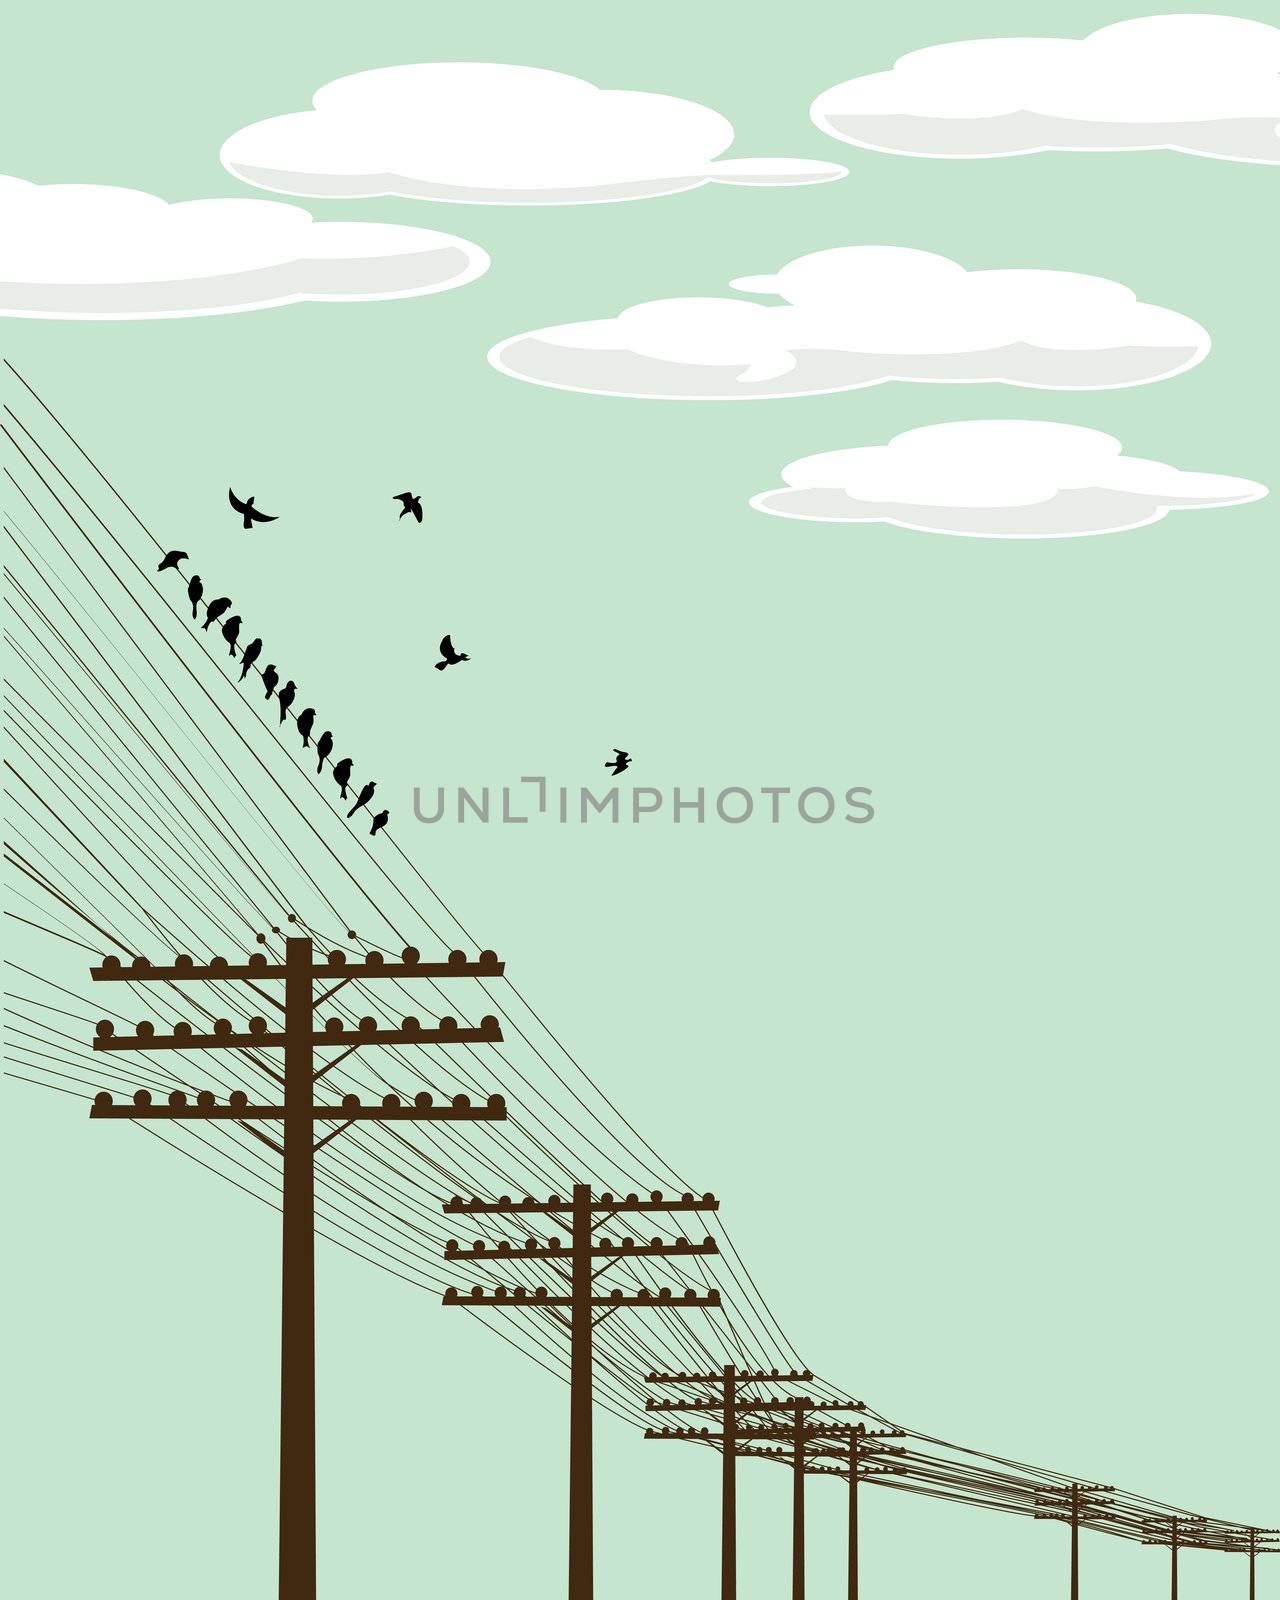 Electricity poles and birds silhouettes background illustration